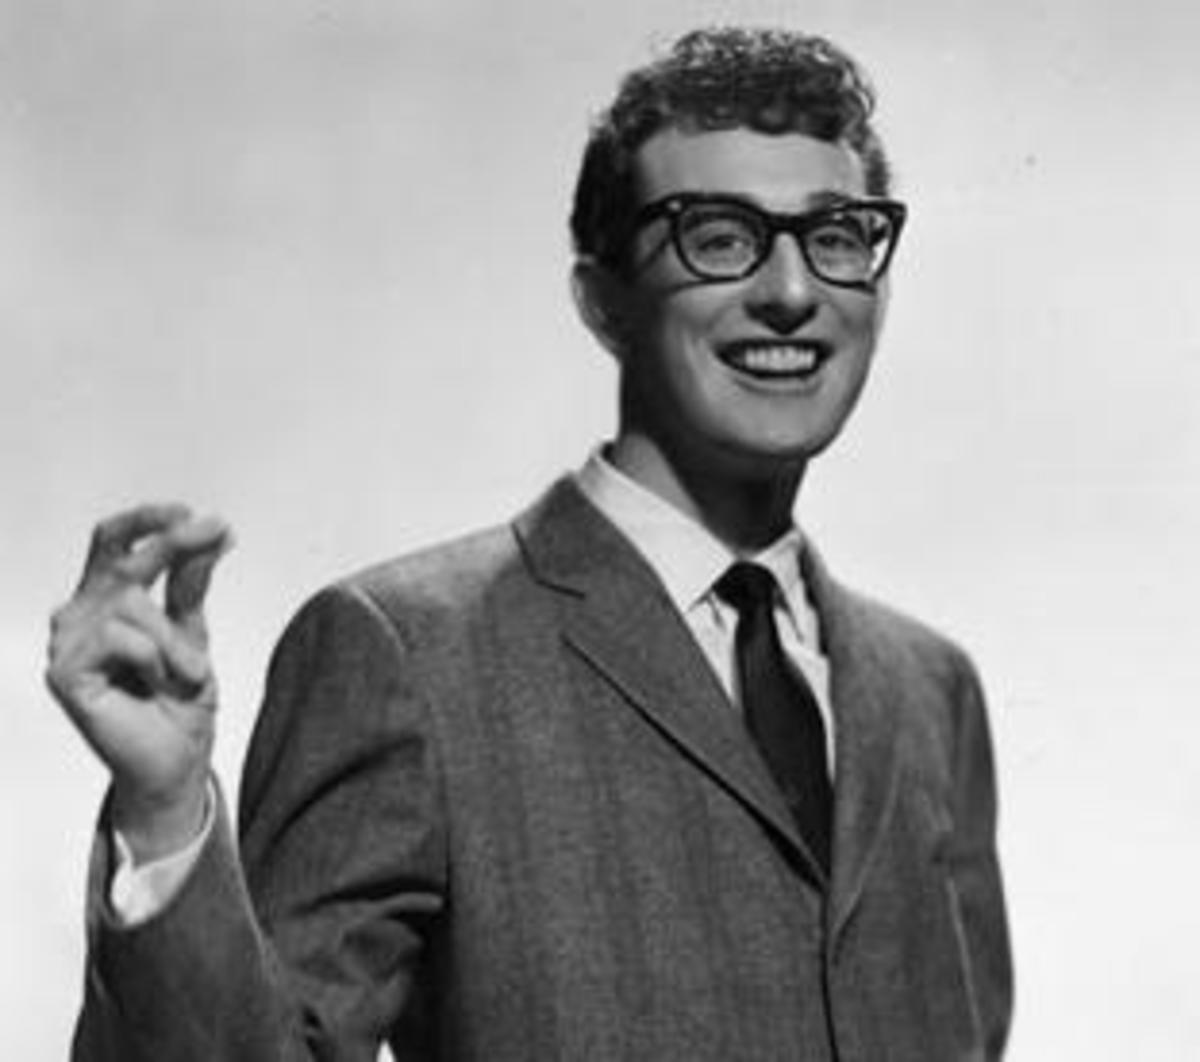 The tragic plane crash death of Buddy Holly was the subject matter of Don McLean's 1971 hit "American Pie". 